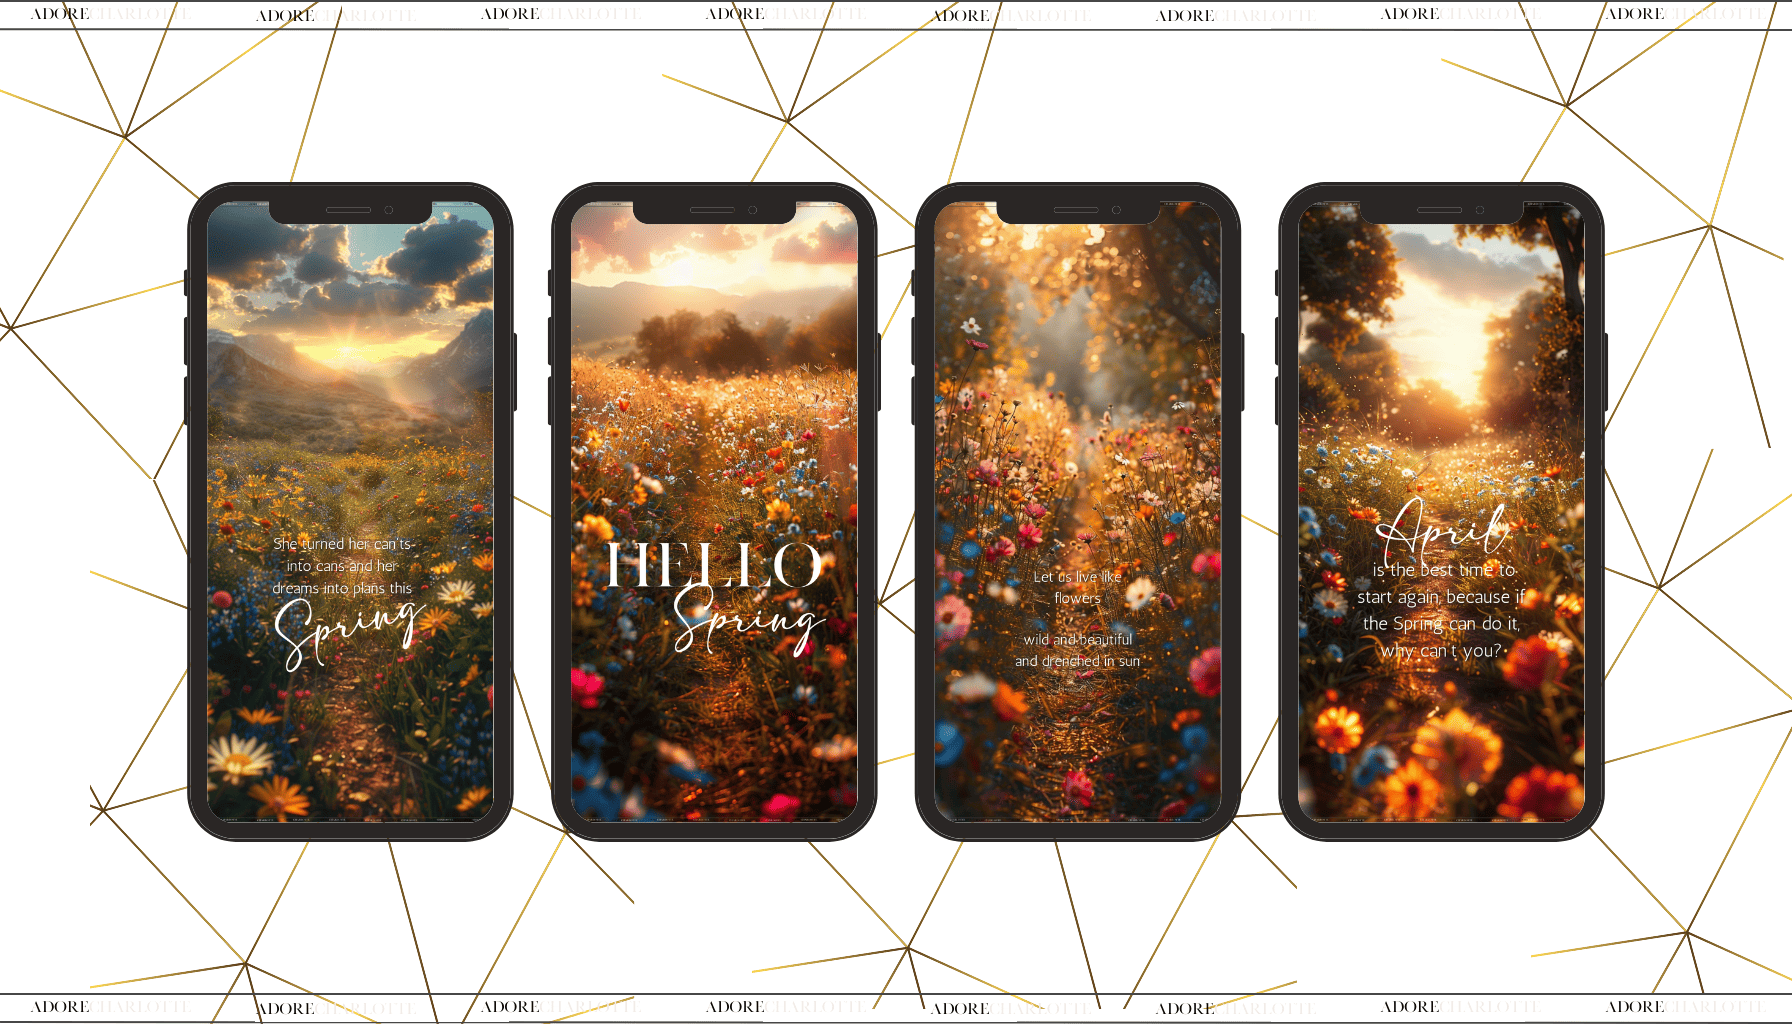 An Iphone Mockup with Wildflower Meadows at Sunset Theme iphone wallpapers